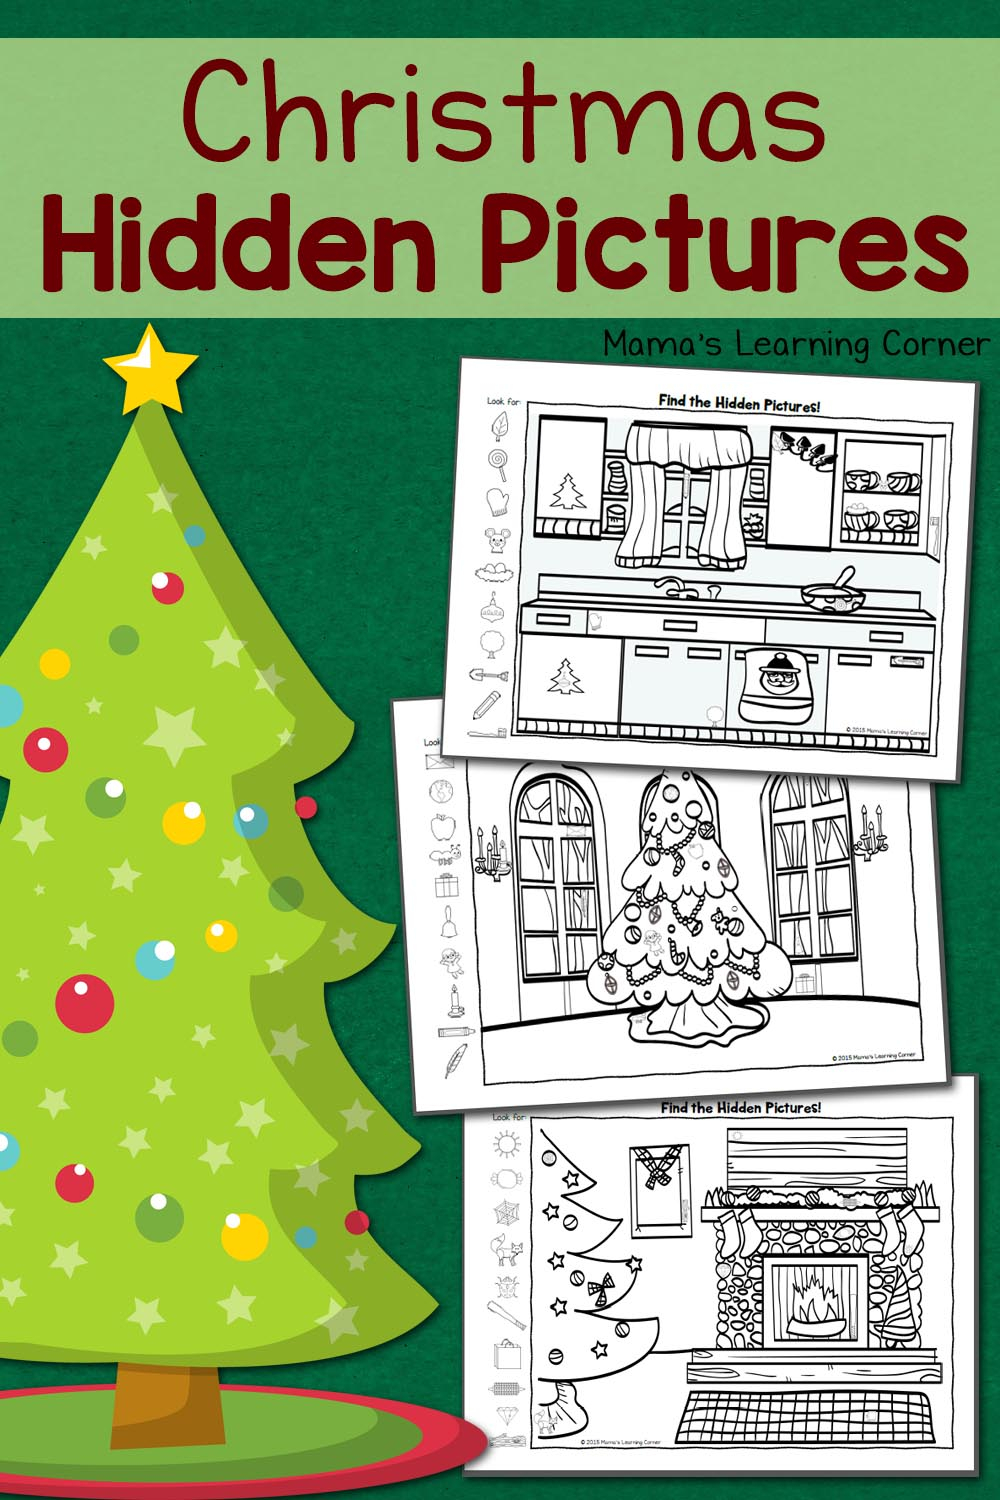 Christmas Hidden Pictures Worksheets - Mamas Learning Corner